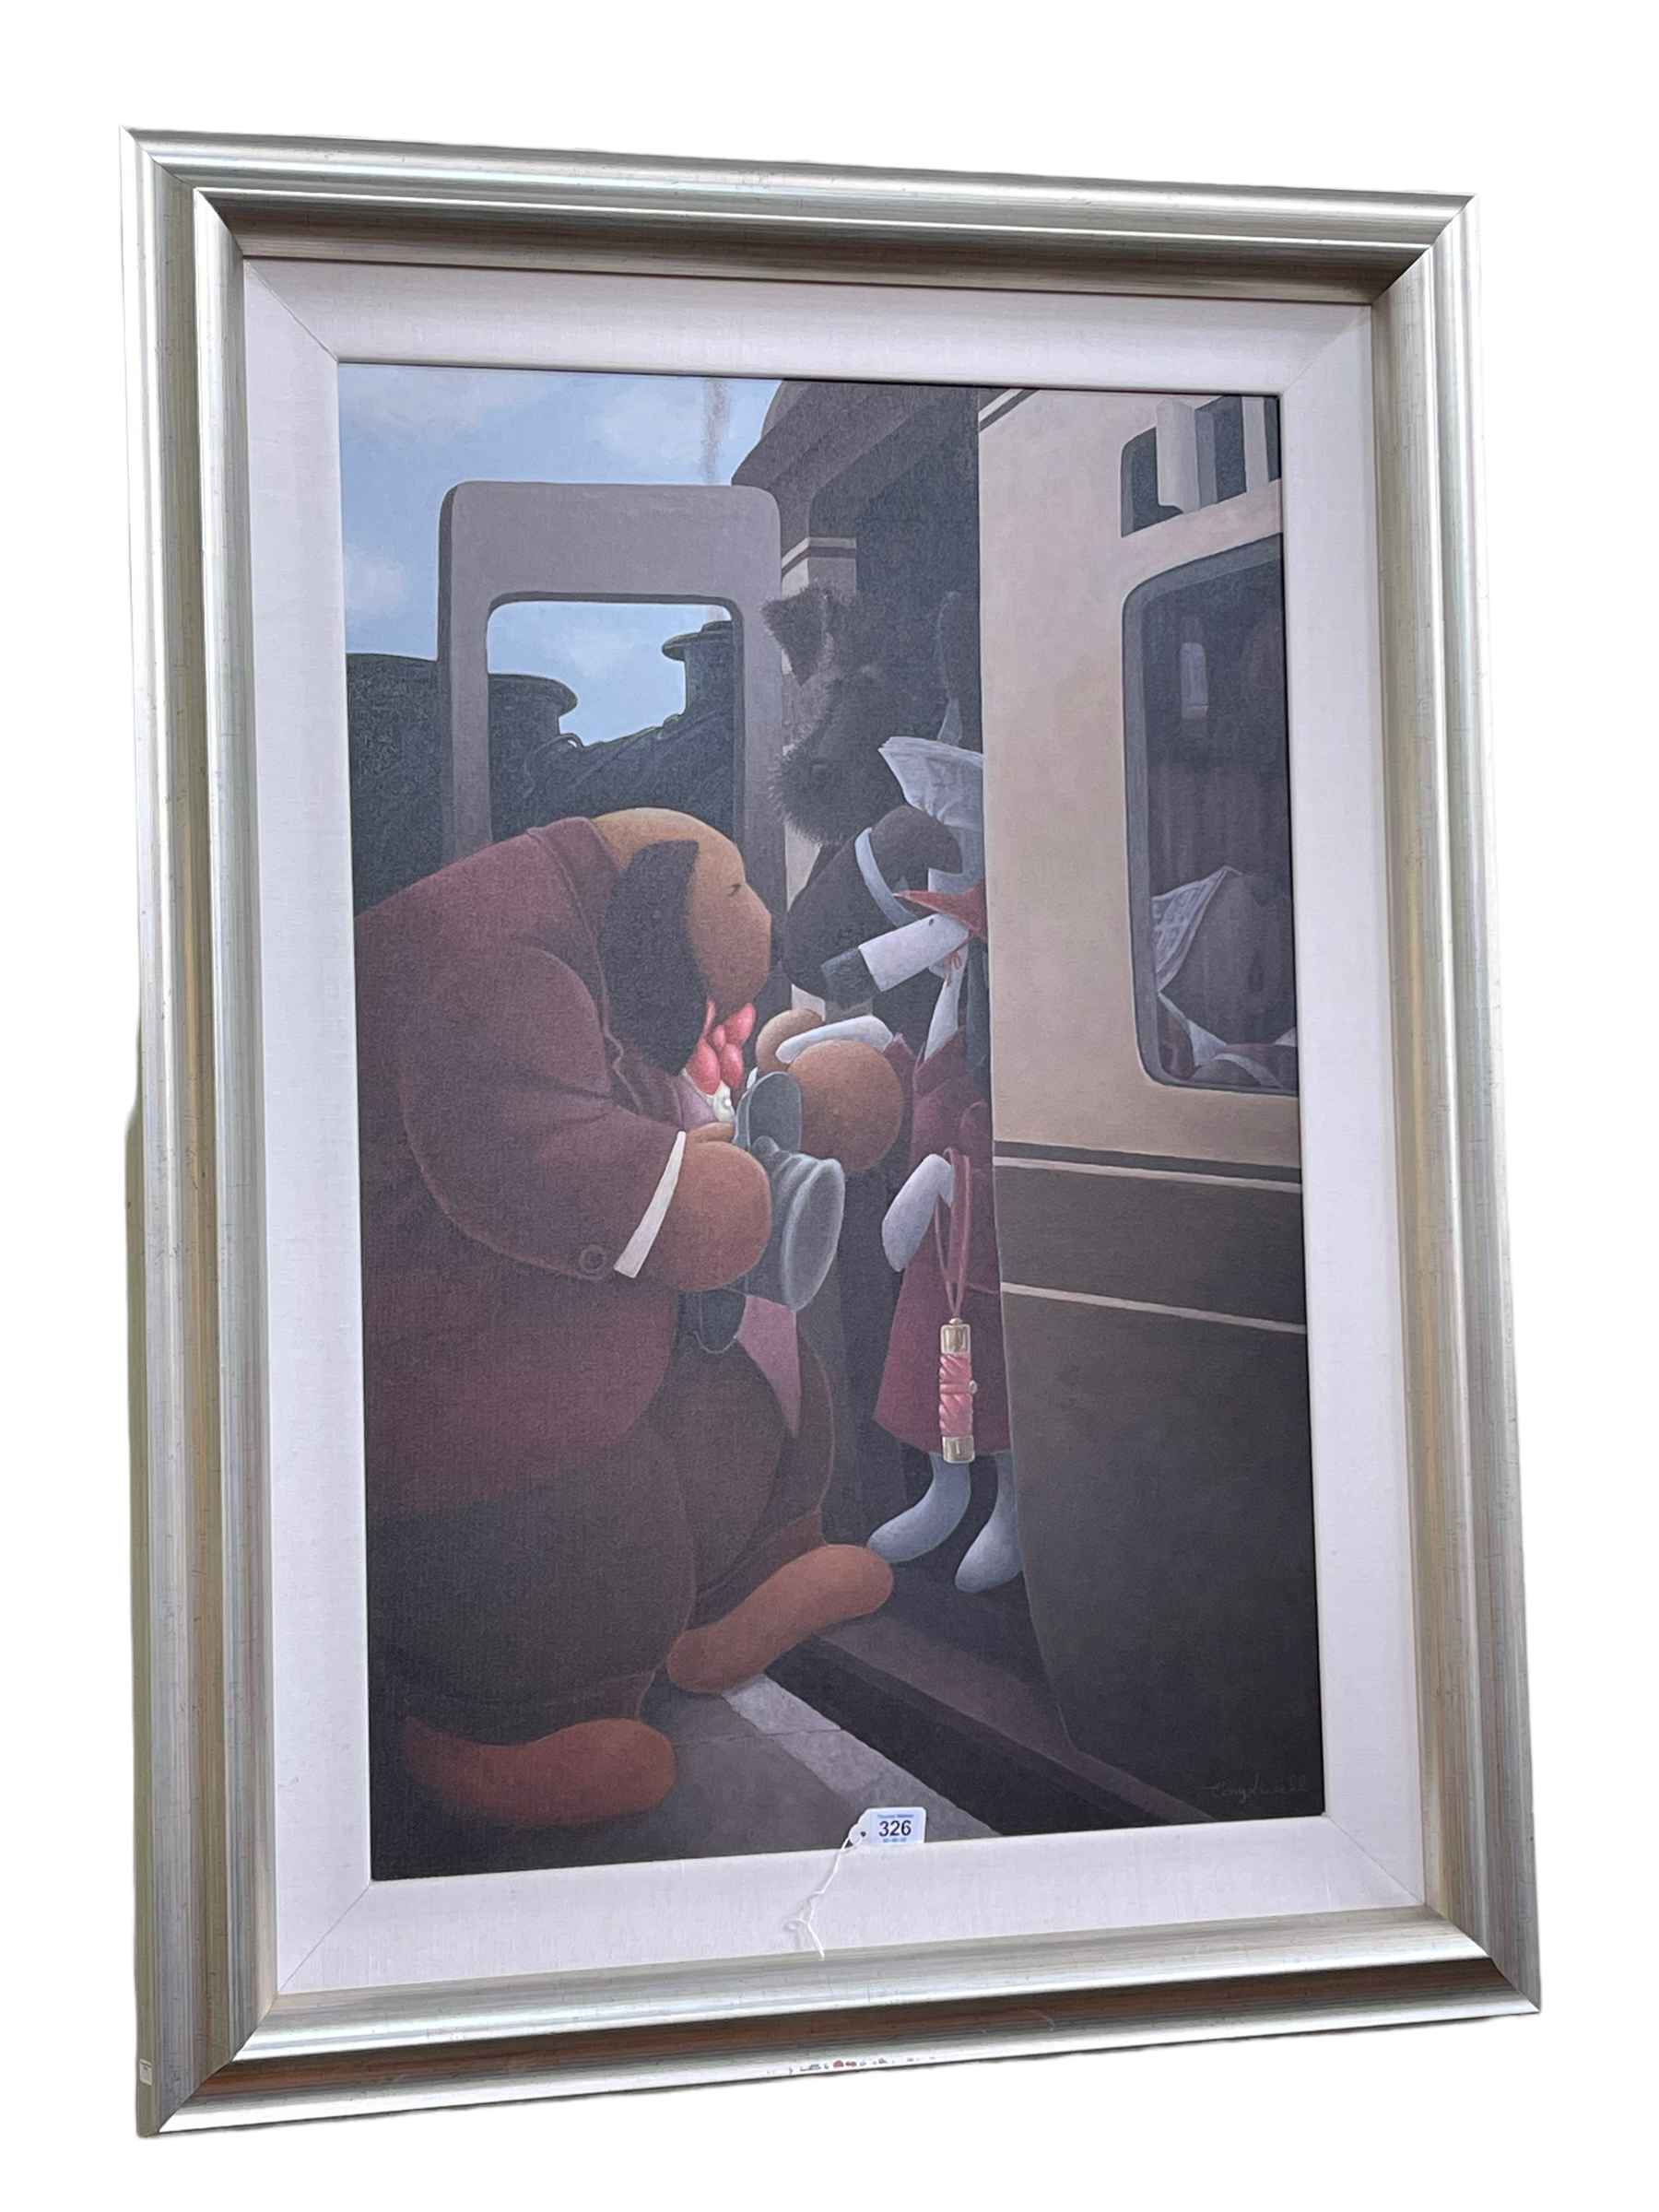 Tony Linsell, Two's Company, oil on canvas, signed lower right, 90cm by 59cm, in silvered frame.